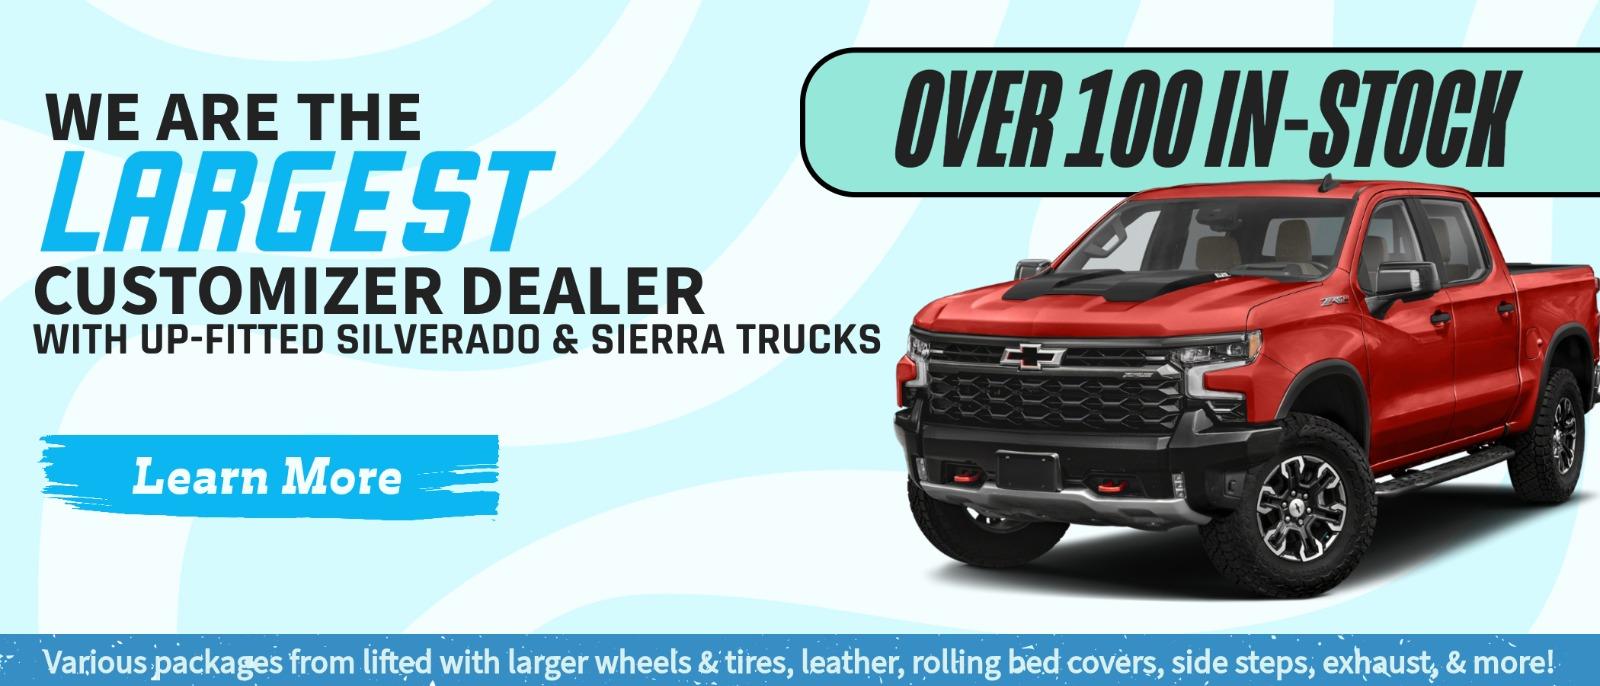 We are the largest Customizer Dealer with up-fitted Silverado and Sierra trucks